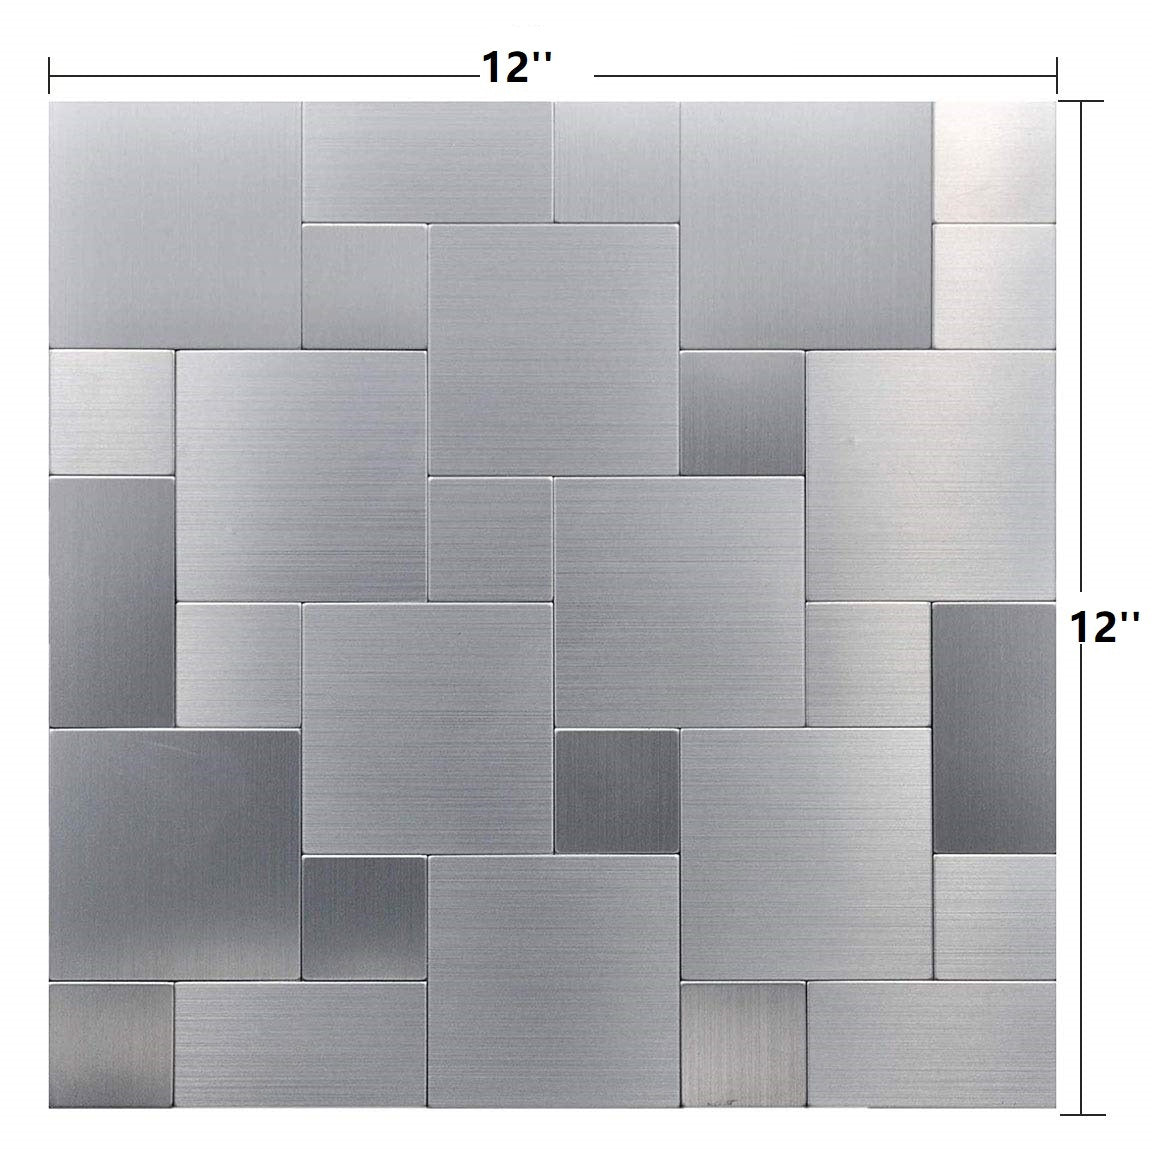 Silver "Intersected Sqaure Metal Tile Peel and Stick for Kitchen, Bathroom